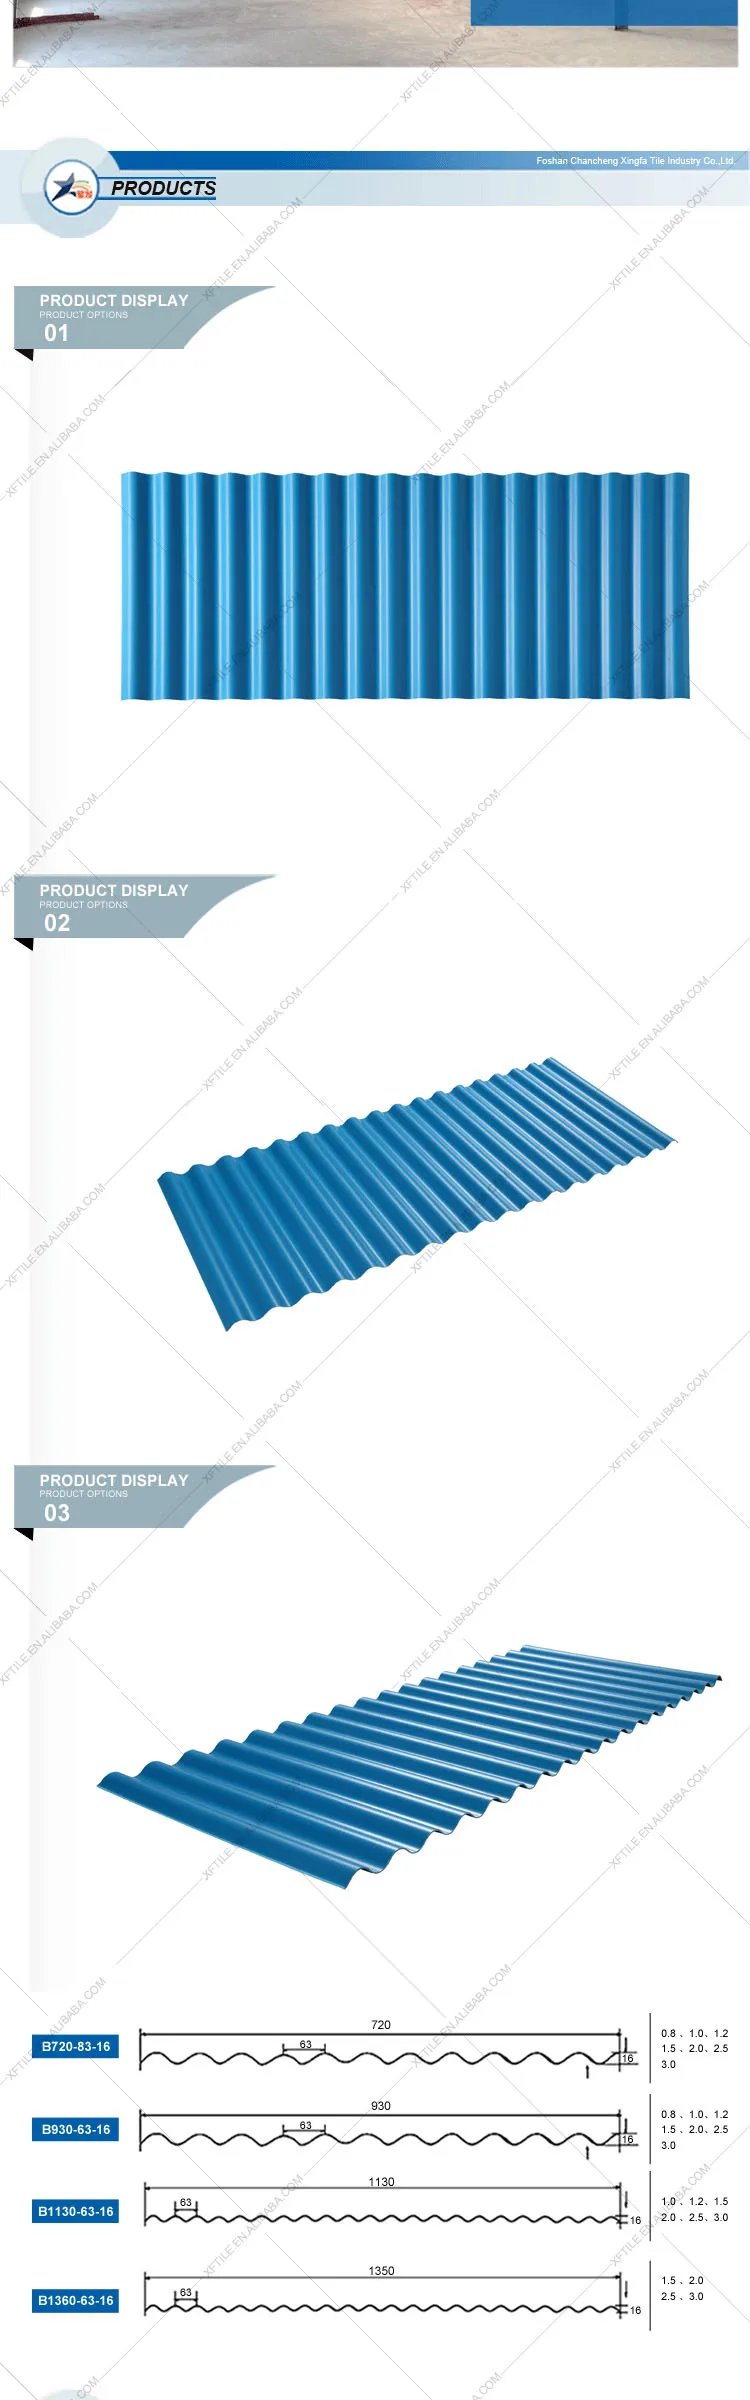 Looking For Agents To Distribute Our Products Corrugated Plastic Roofing Sheet Tile